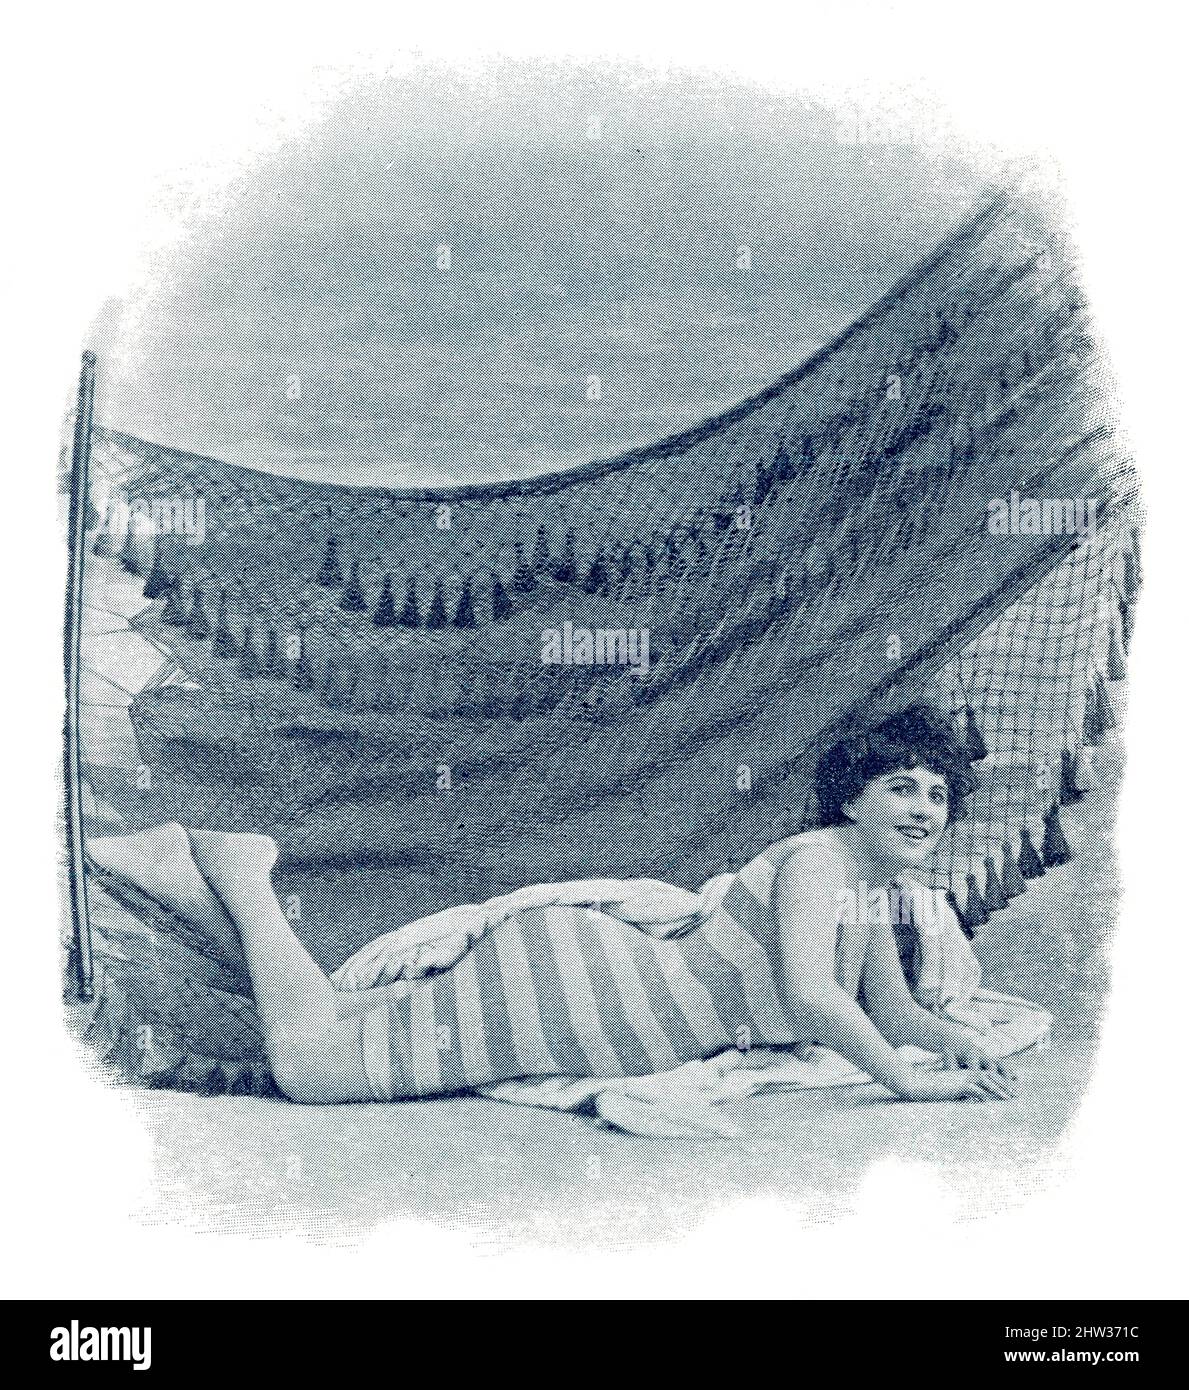 Parisian naiads. Portrait of a woman on the beach in a bathing suit. Image from the illustrated Franco-German theater magazine 'Das Album', 1898. Stock Photo